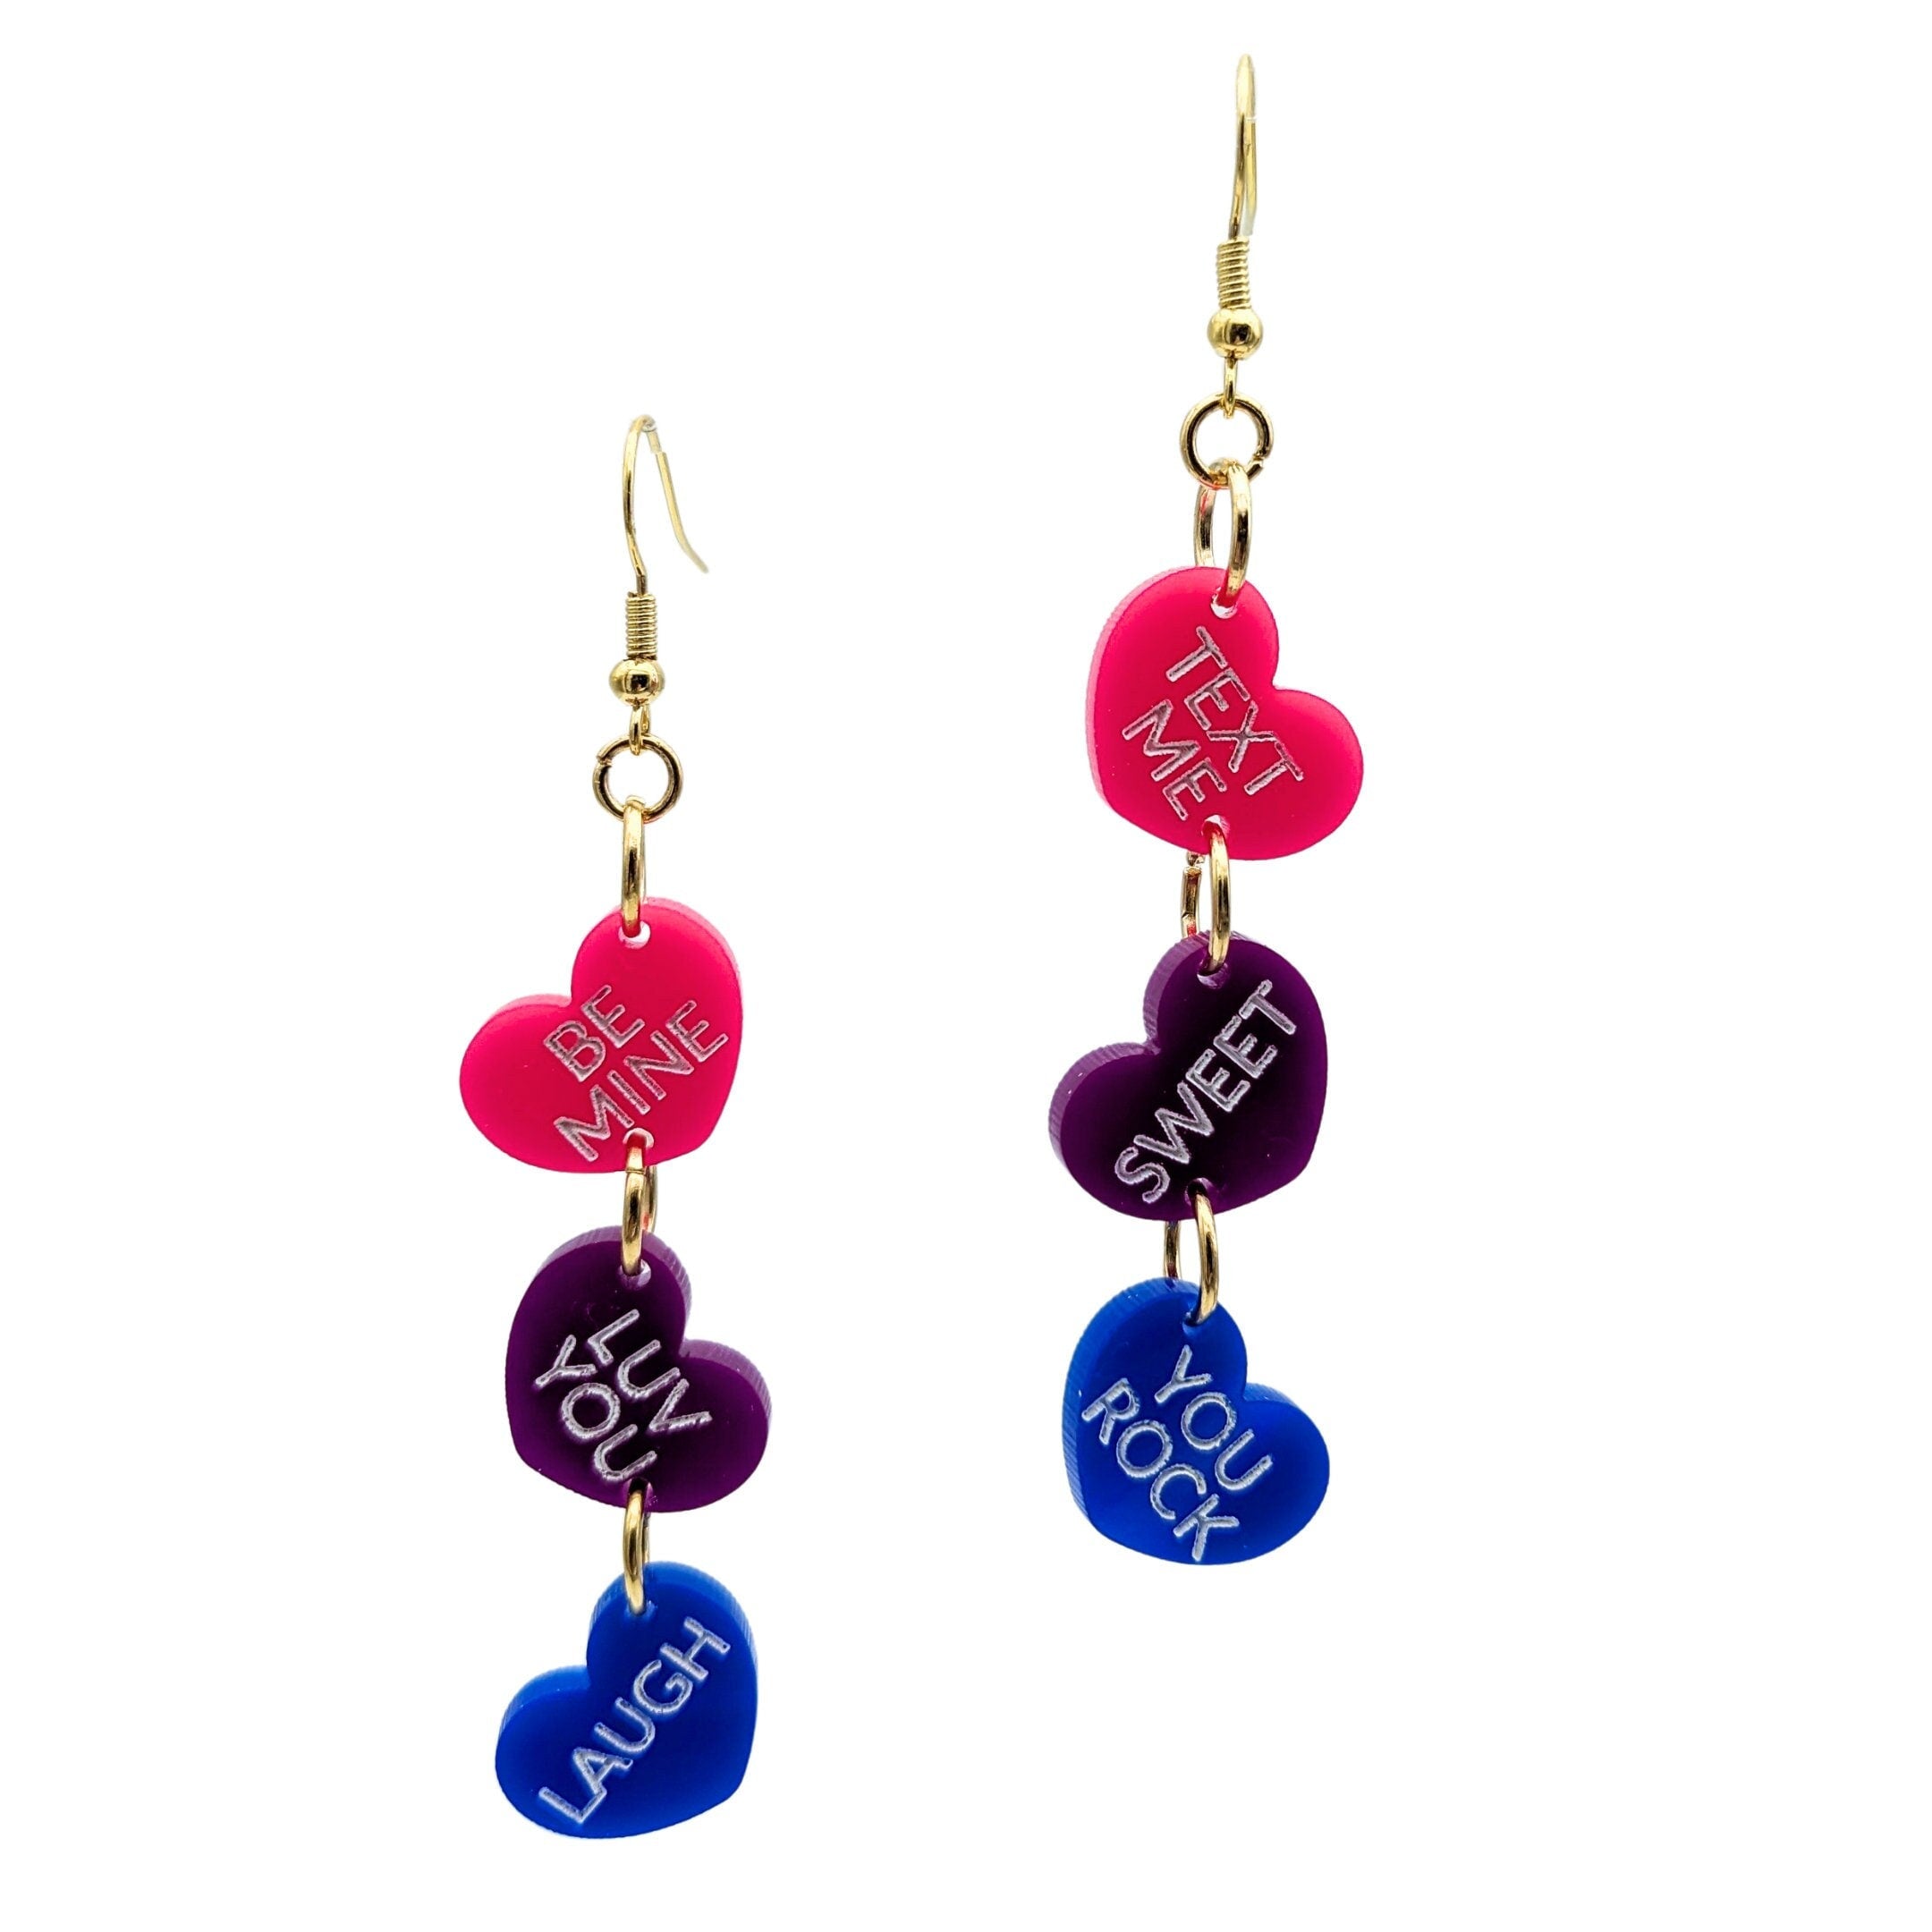 Valentines Day Earrings - Shop on Pinterest